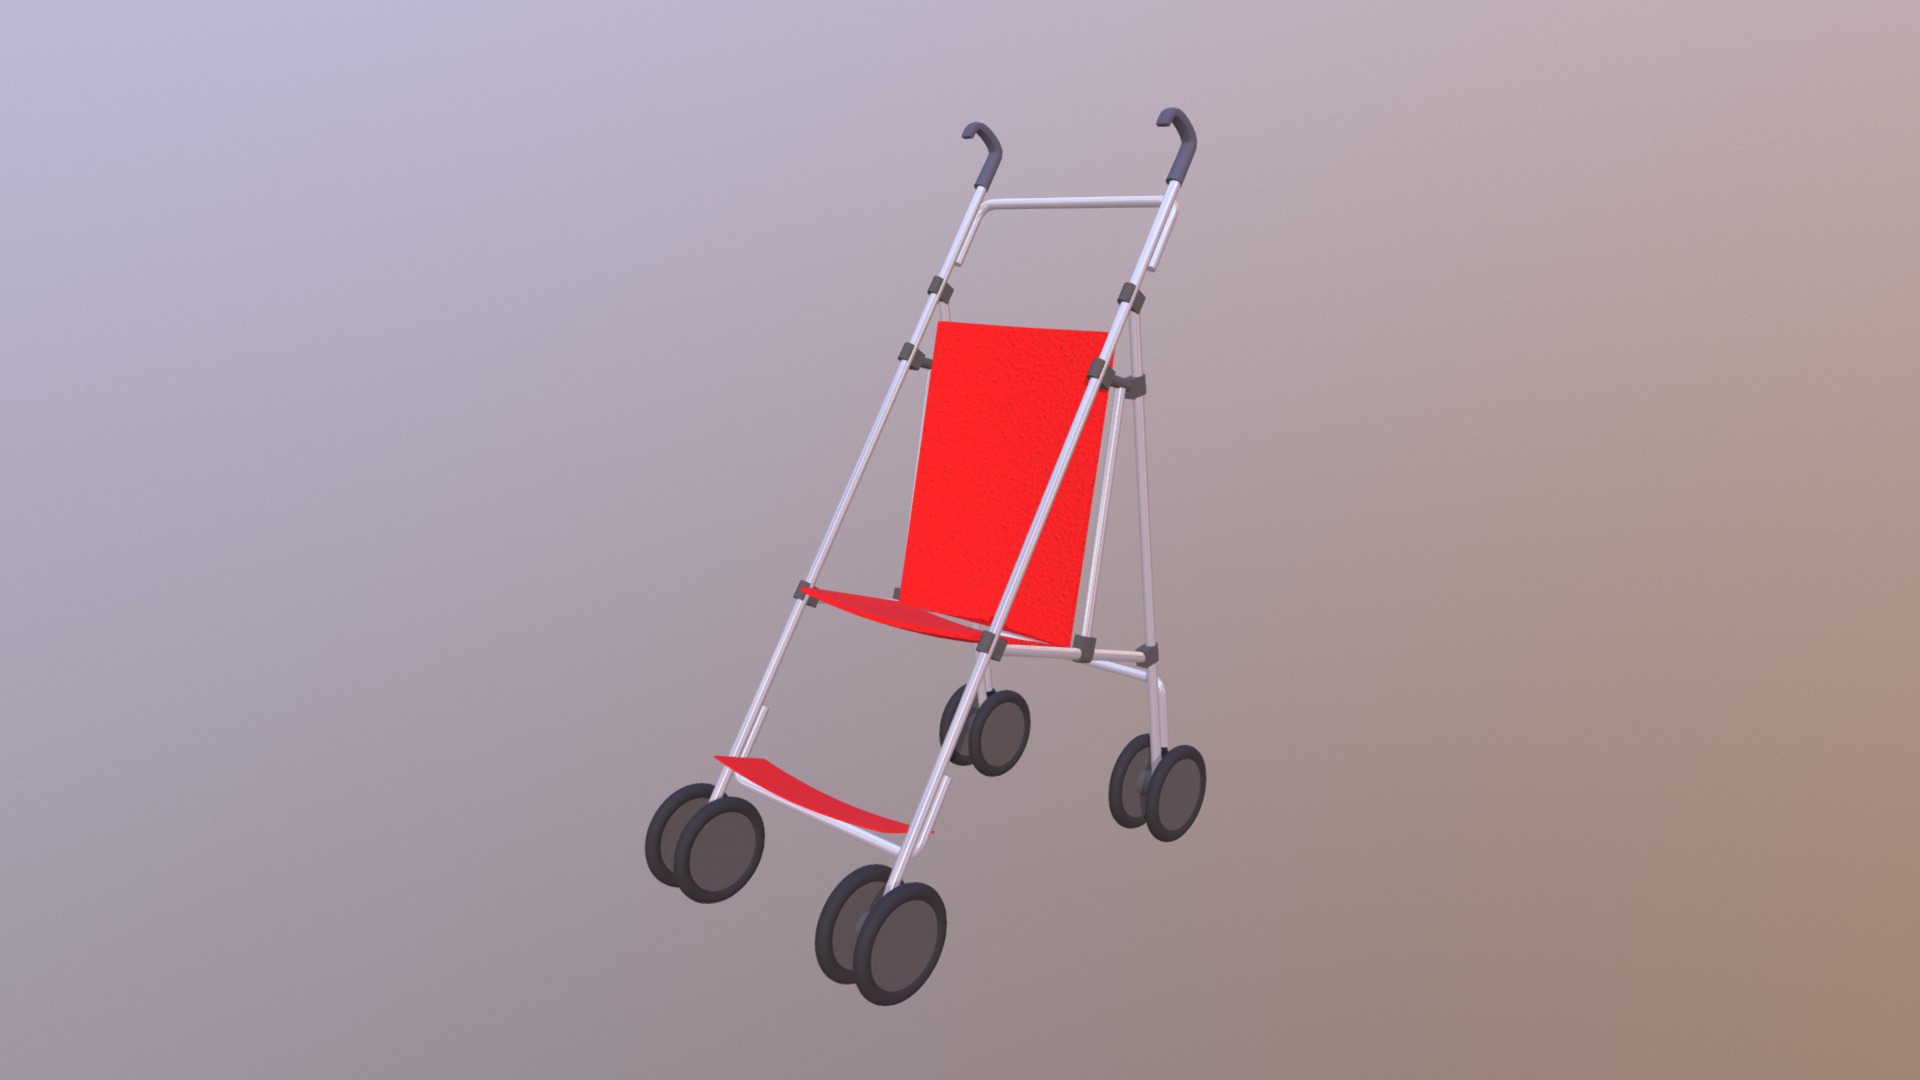 3D model Stroller1 - This is a 3D model of the Stroller1. The 3D model is about a white and red satellite dish.